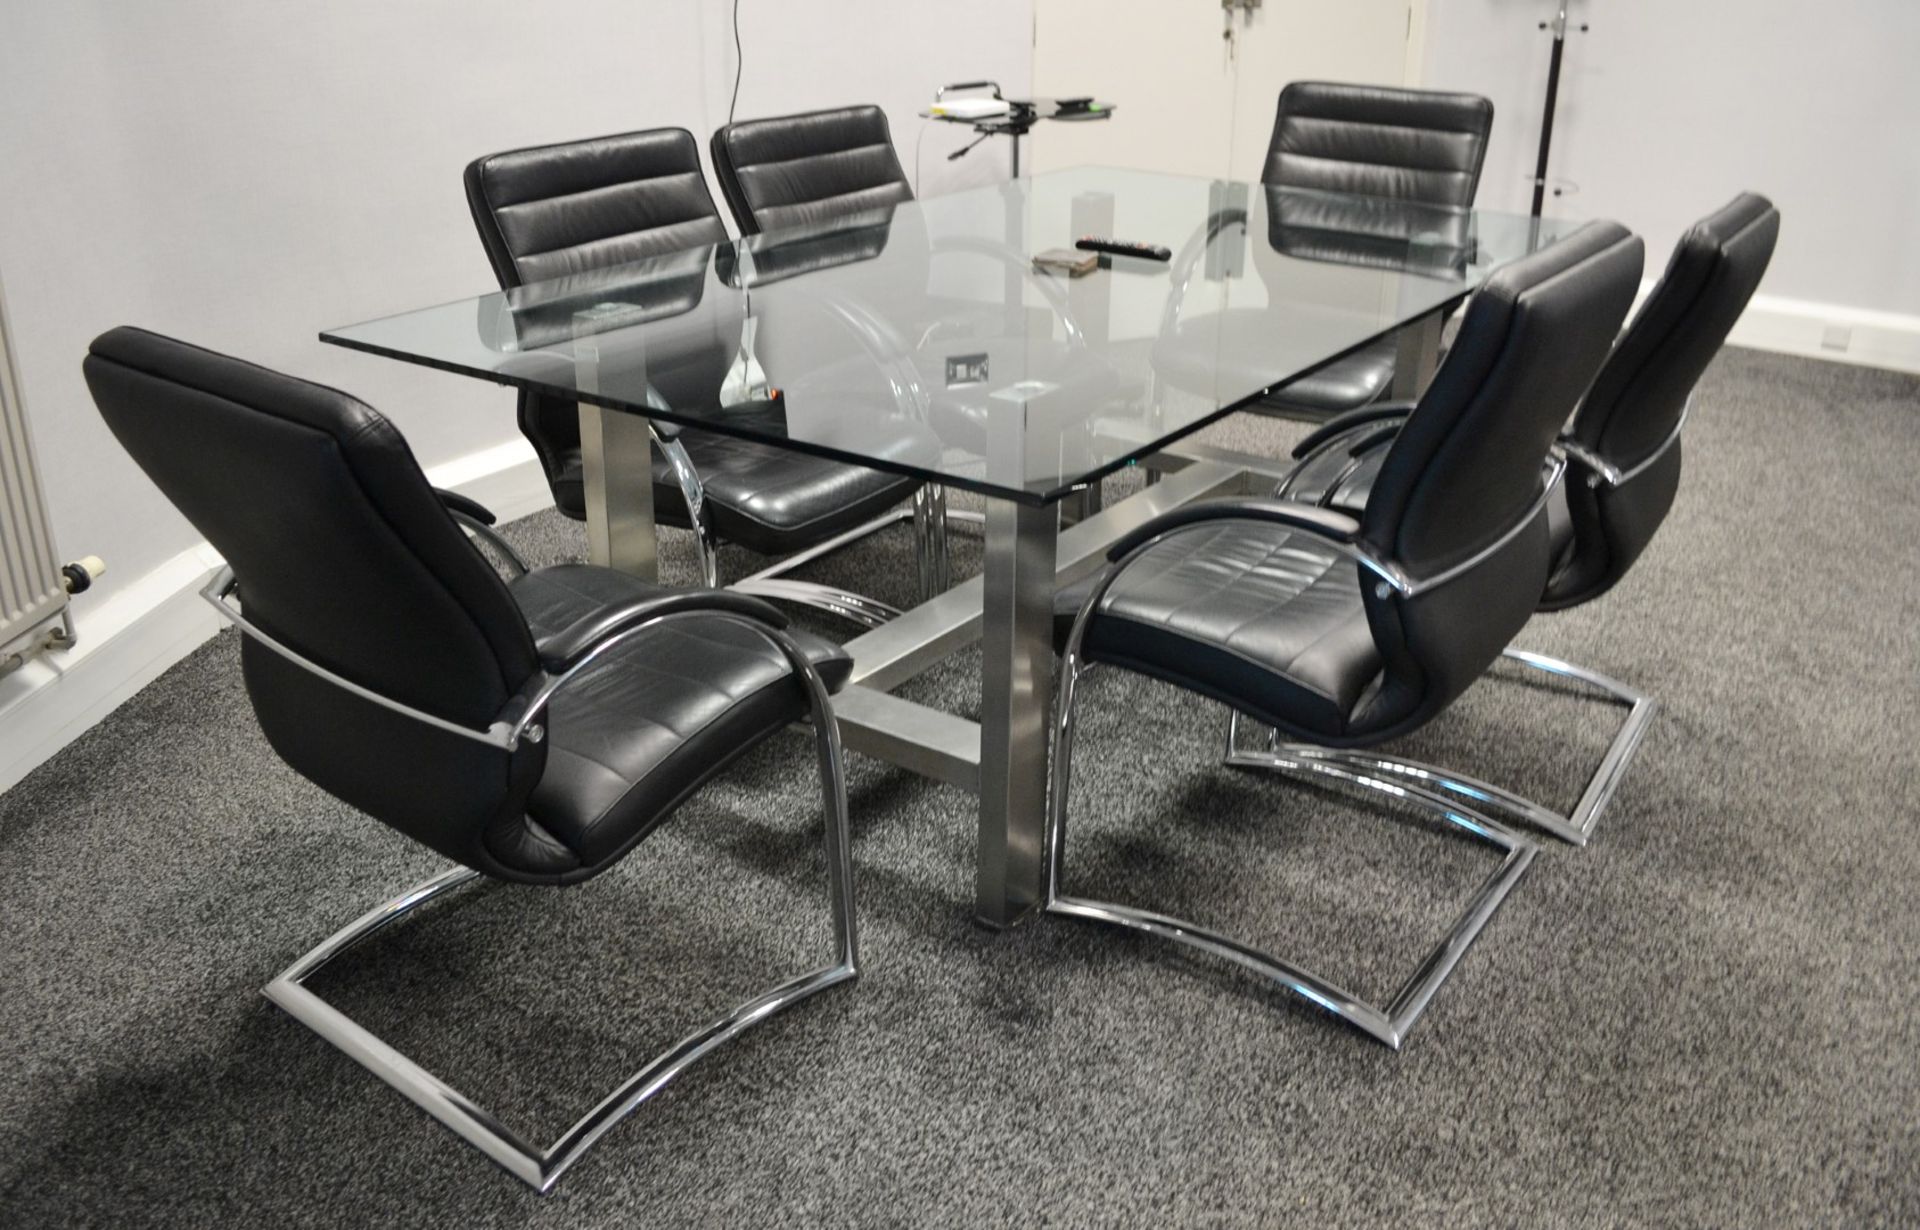 1 x Contemporary Glass Boardroom Table With 6 x Black Leather Directors Chairs - Ref: VM510/A2